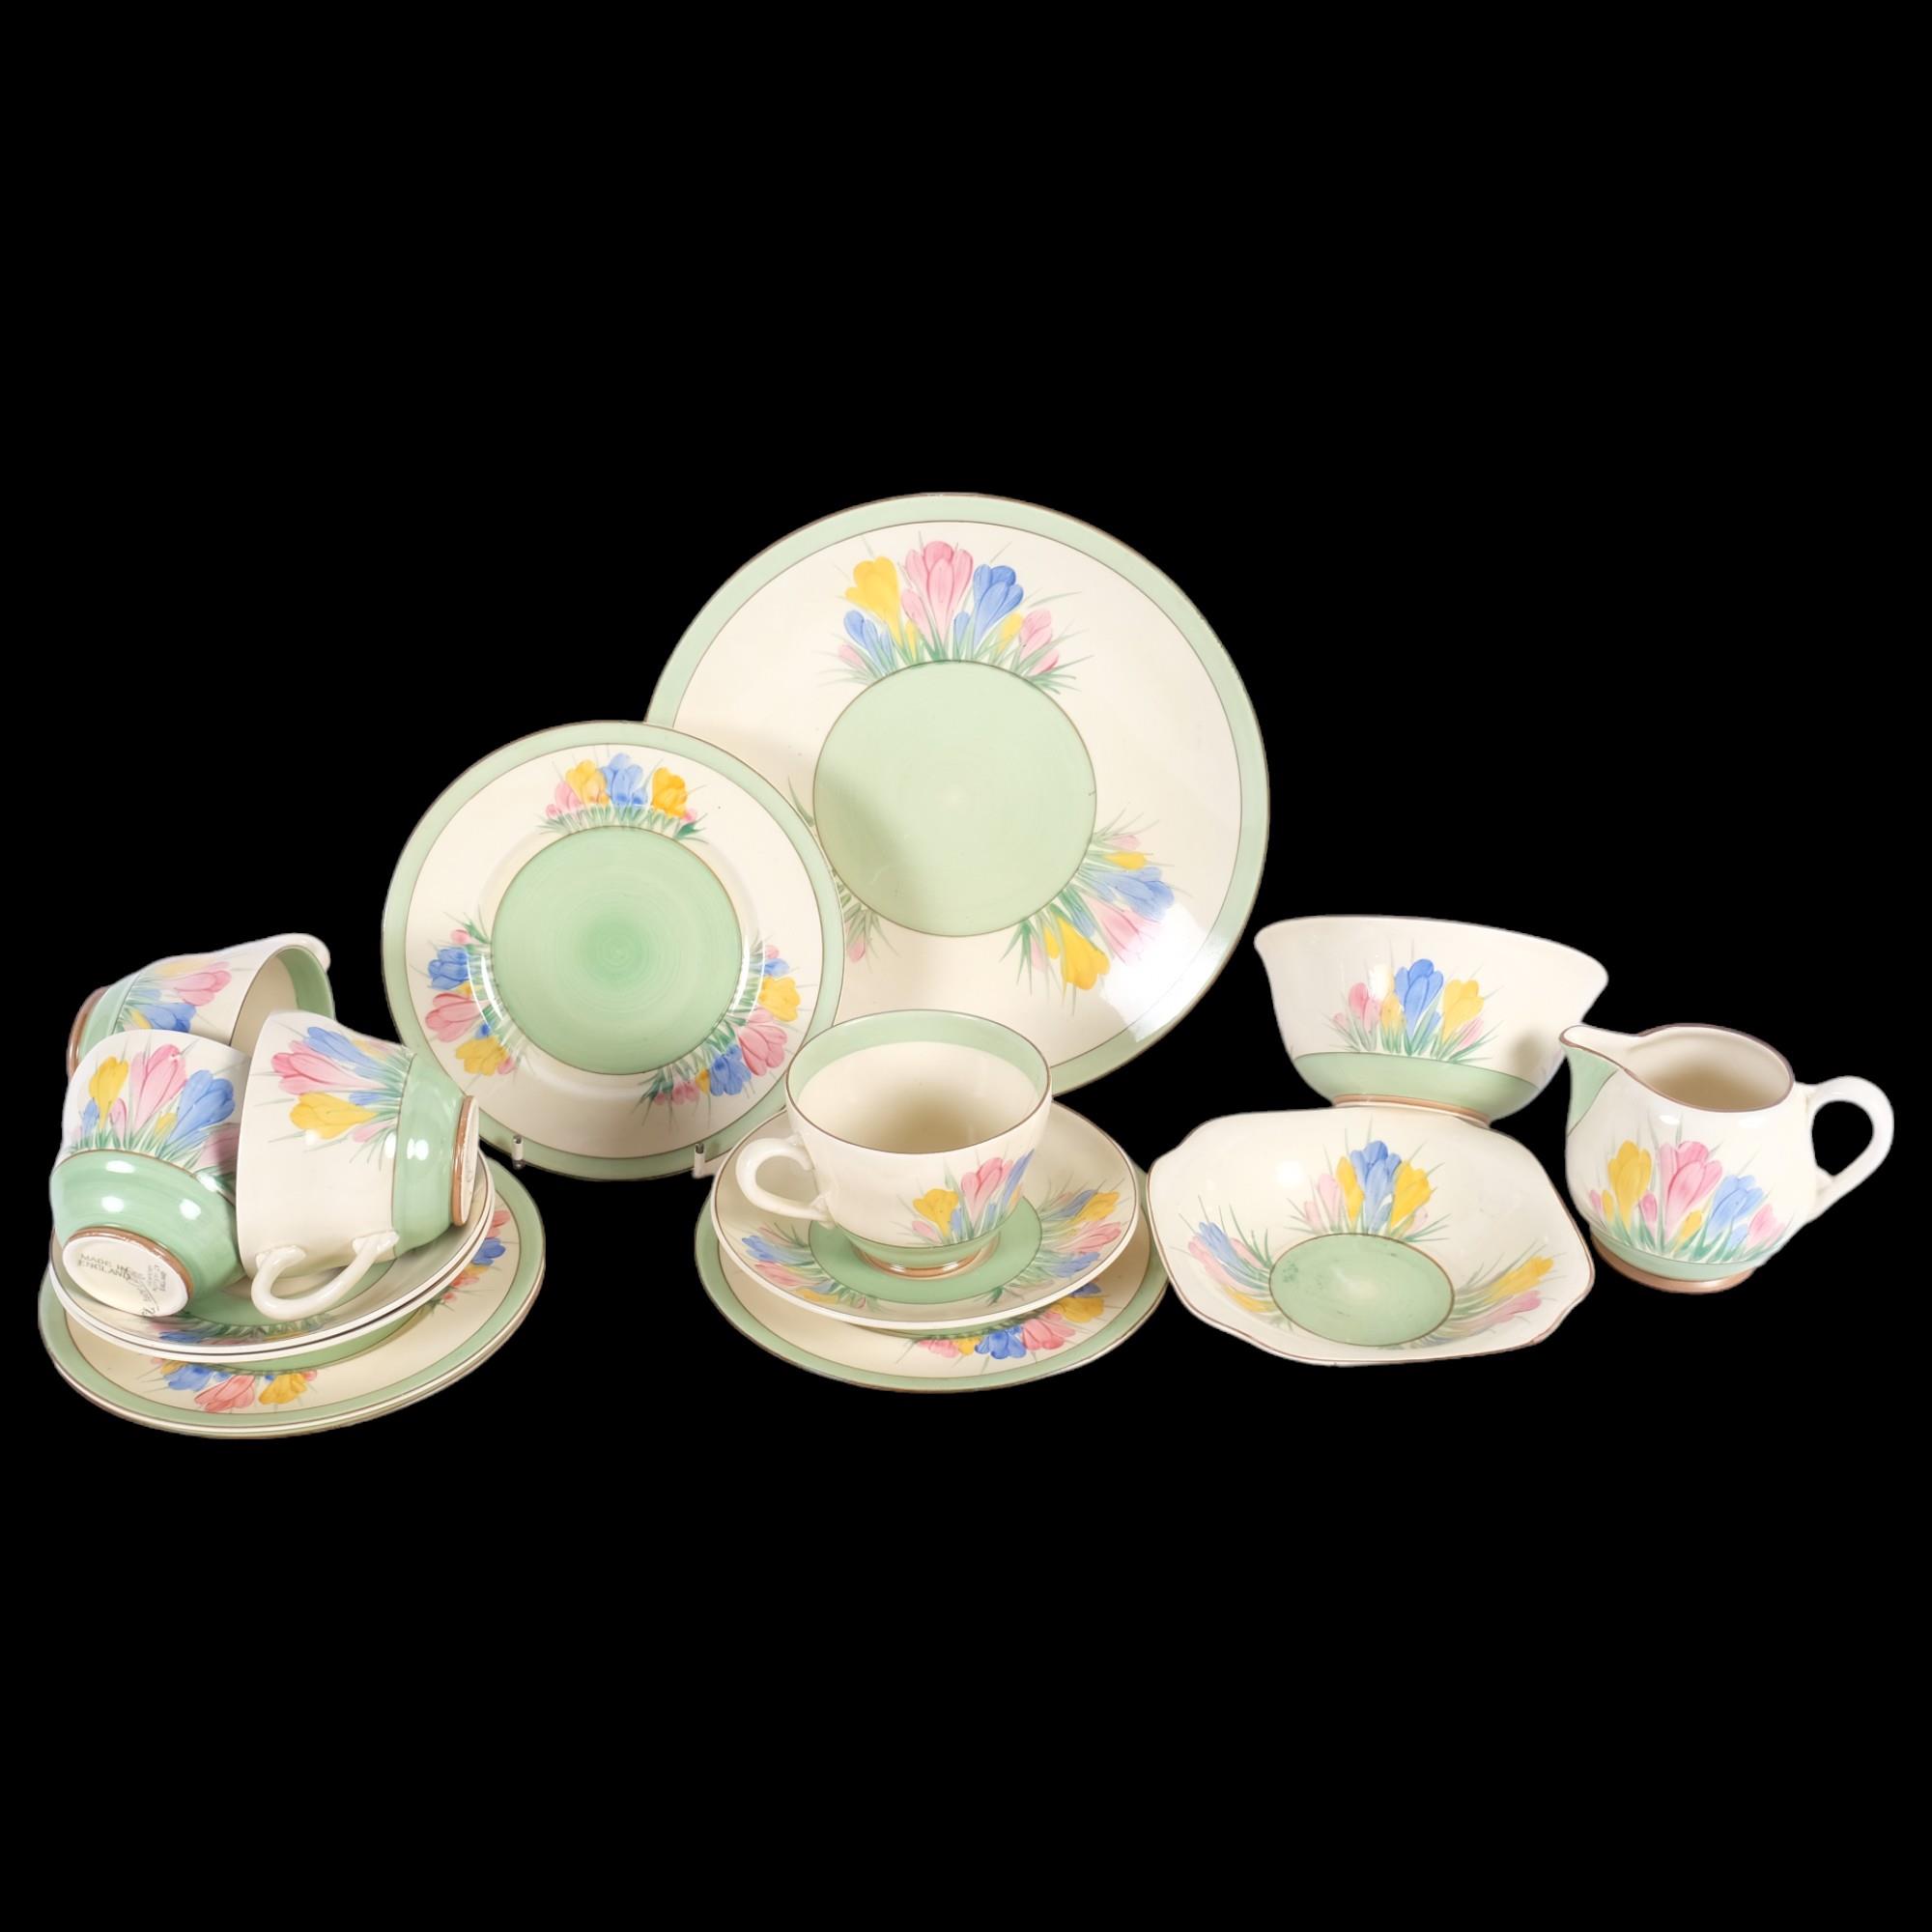 A Clarice Cliff Crocus pattern tea set, comprising 4 cups, 3 saucers, 5 plates, jug and bowl, and